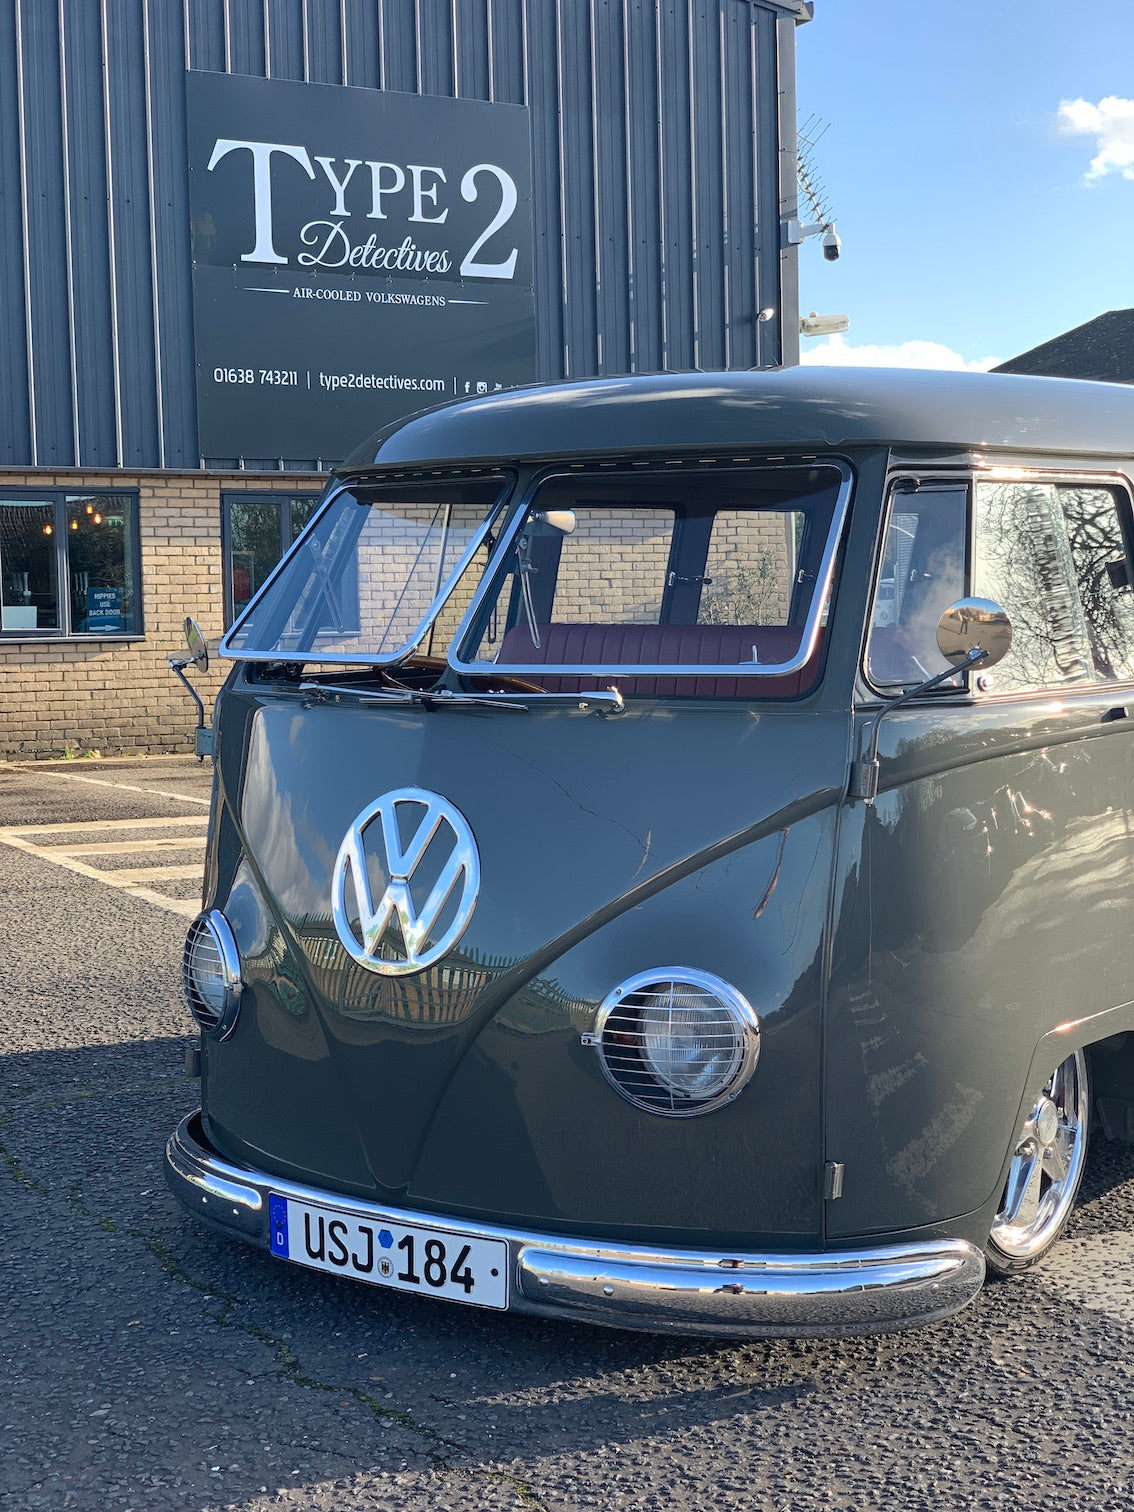 The Ultimate &quot;The Body Dropper&quot; 1959 11 Window Body Dropped Split Screen VW Camper